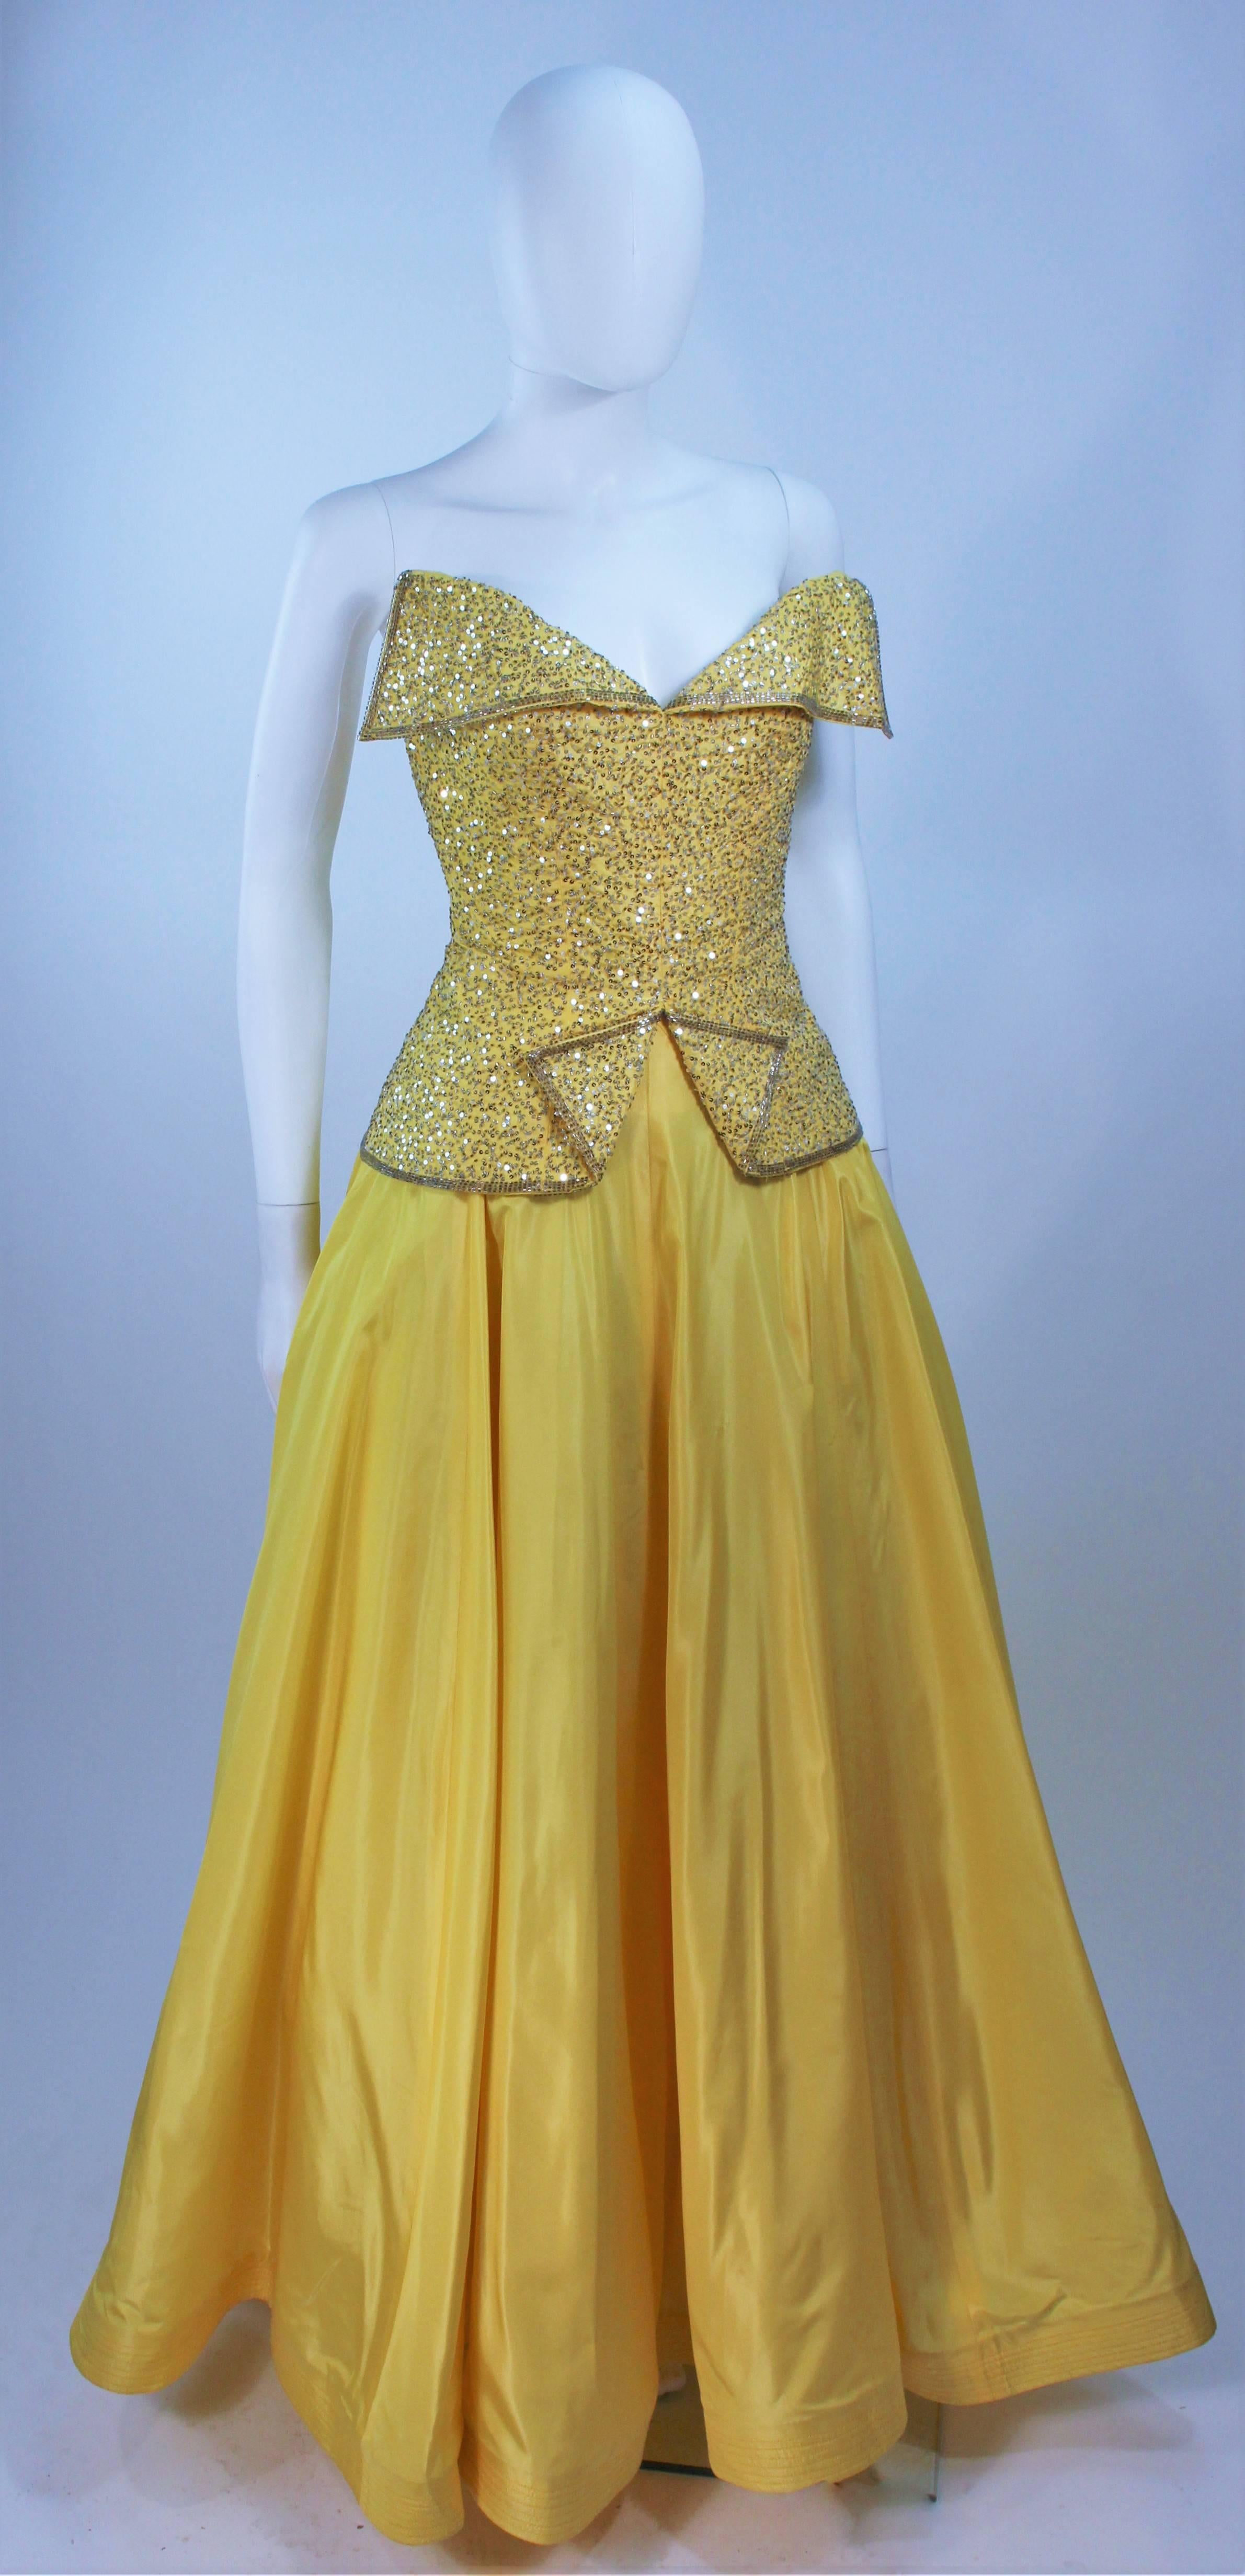  This Murray Arbeid  gown is composed of a yellow silk and features silver sequin applique. The structured bodice features an exaggerated bust and interior bustier foundation with boning. There is interior crinoline (was shot with additional